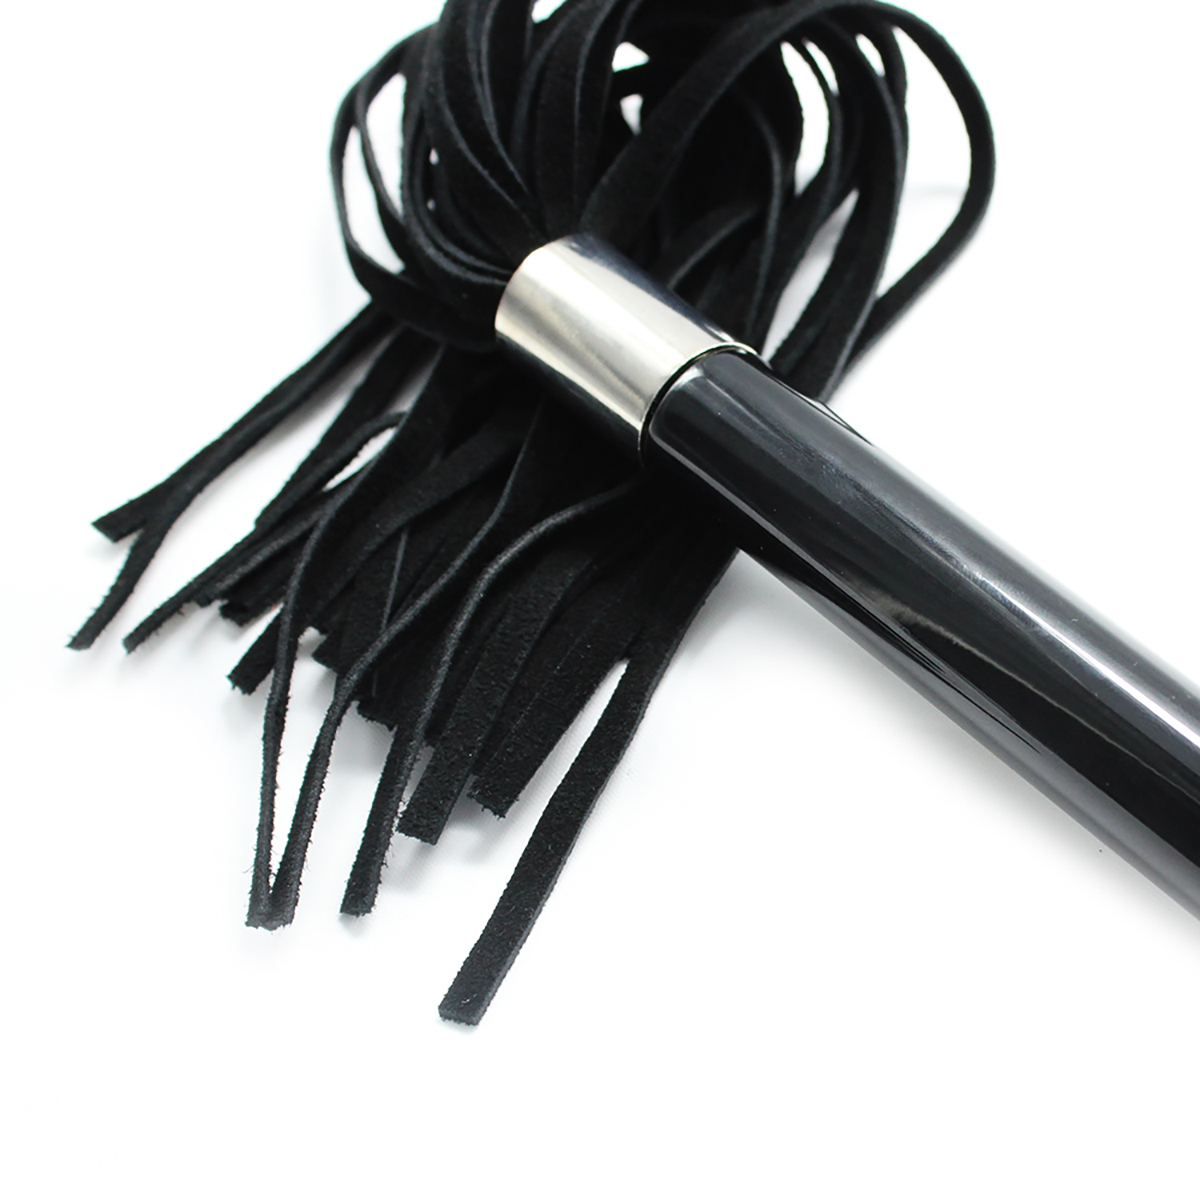 Black-Flogger-With-Acrylic-Handle-OPR-321105-4